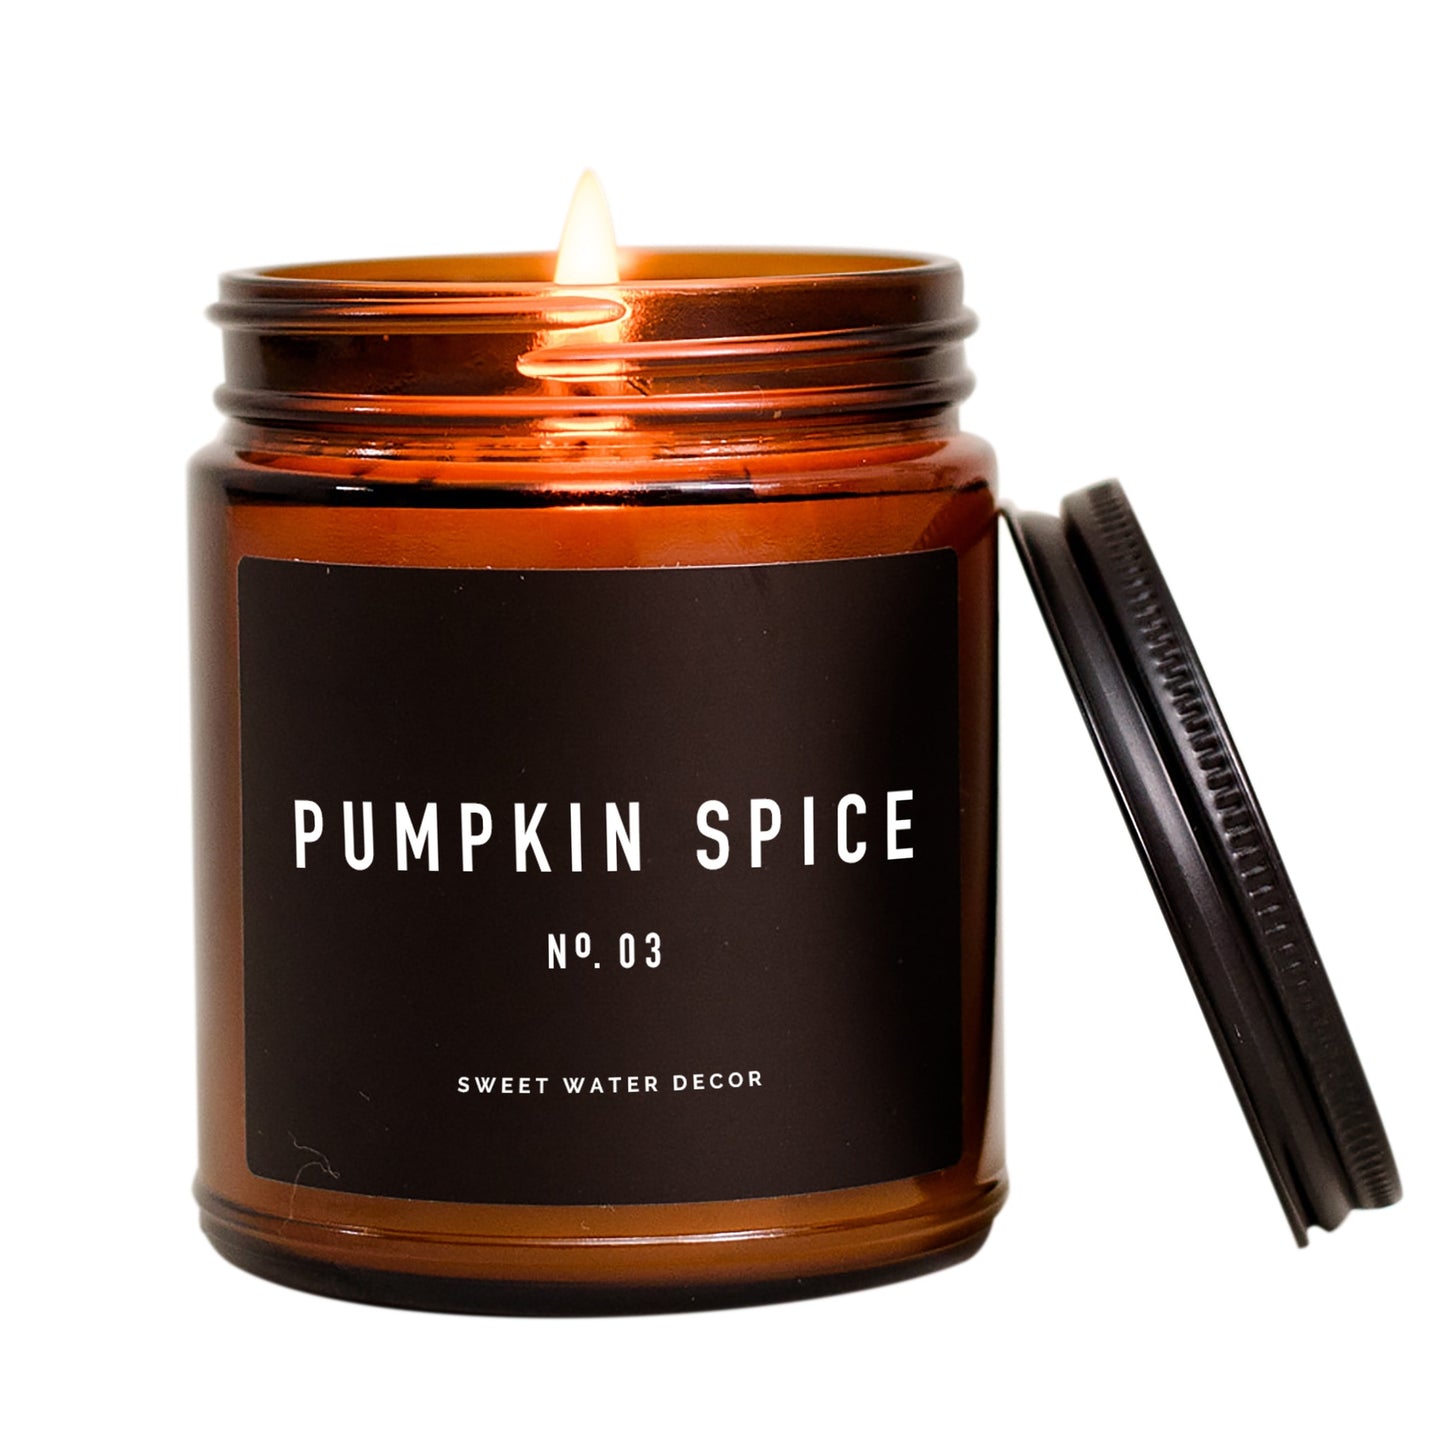 Sweet Water Decor Pumpkin Spice Candle